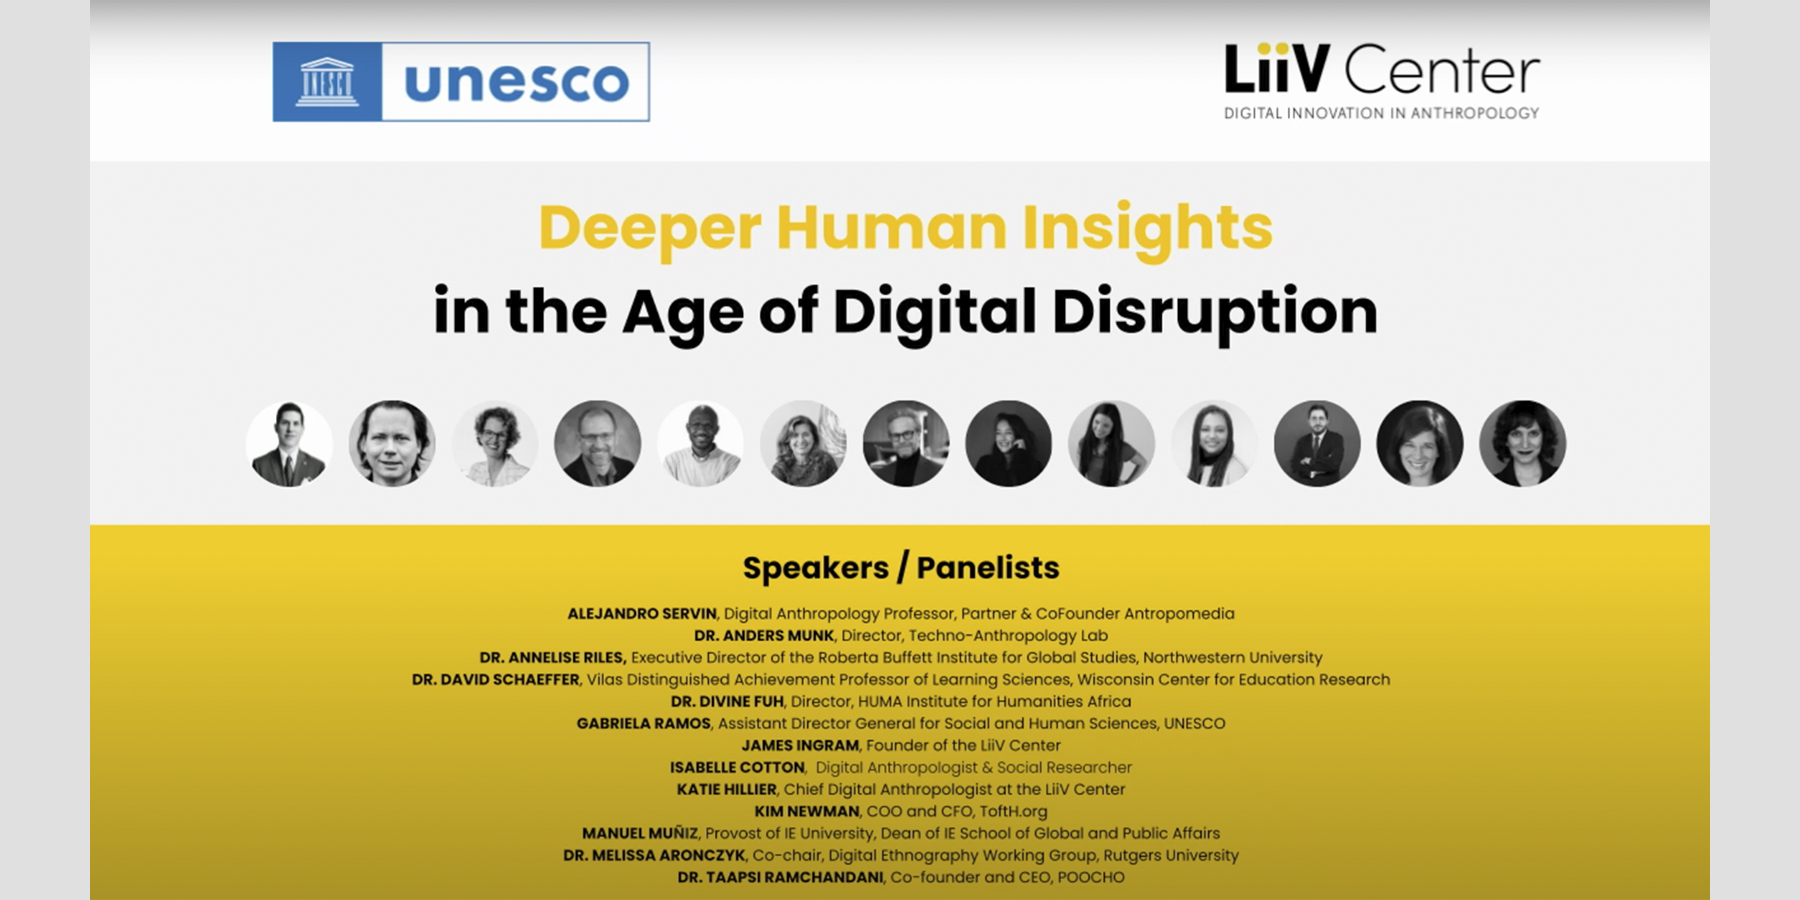 Deeper Human Insights in the Age of Digital Disruption